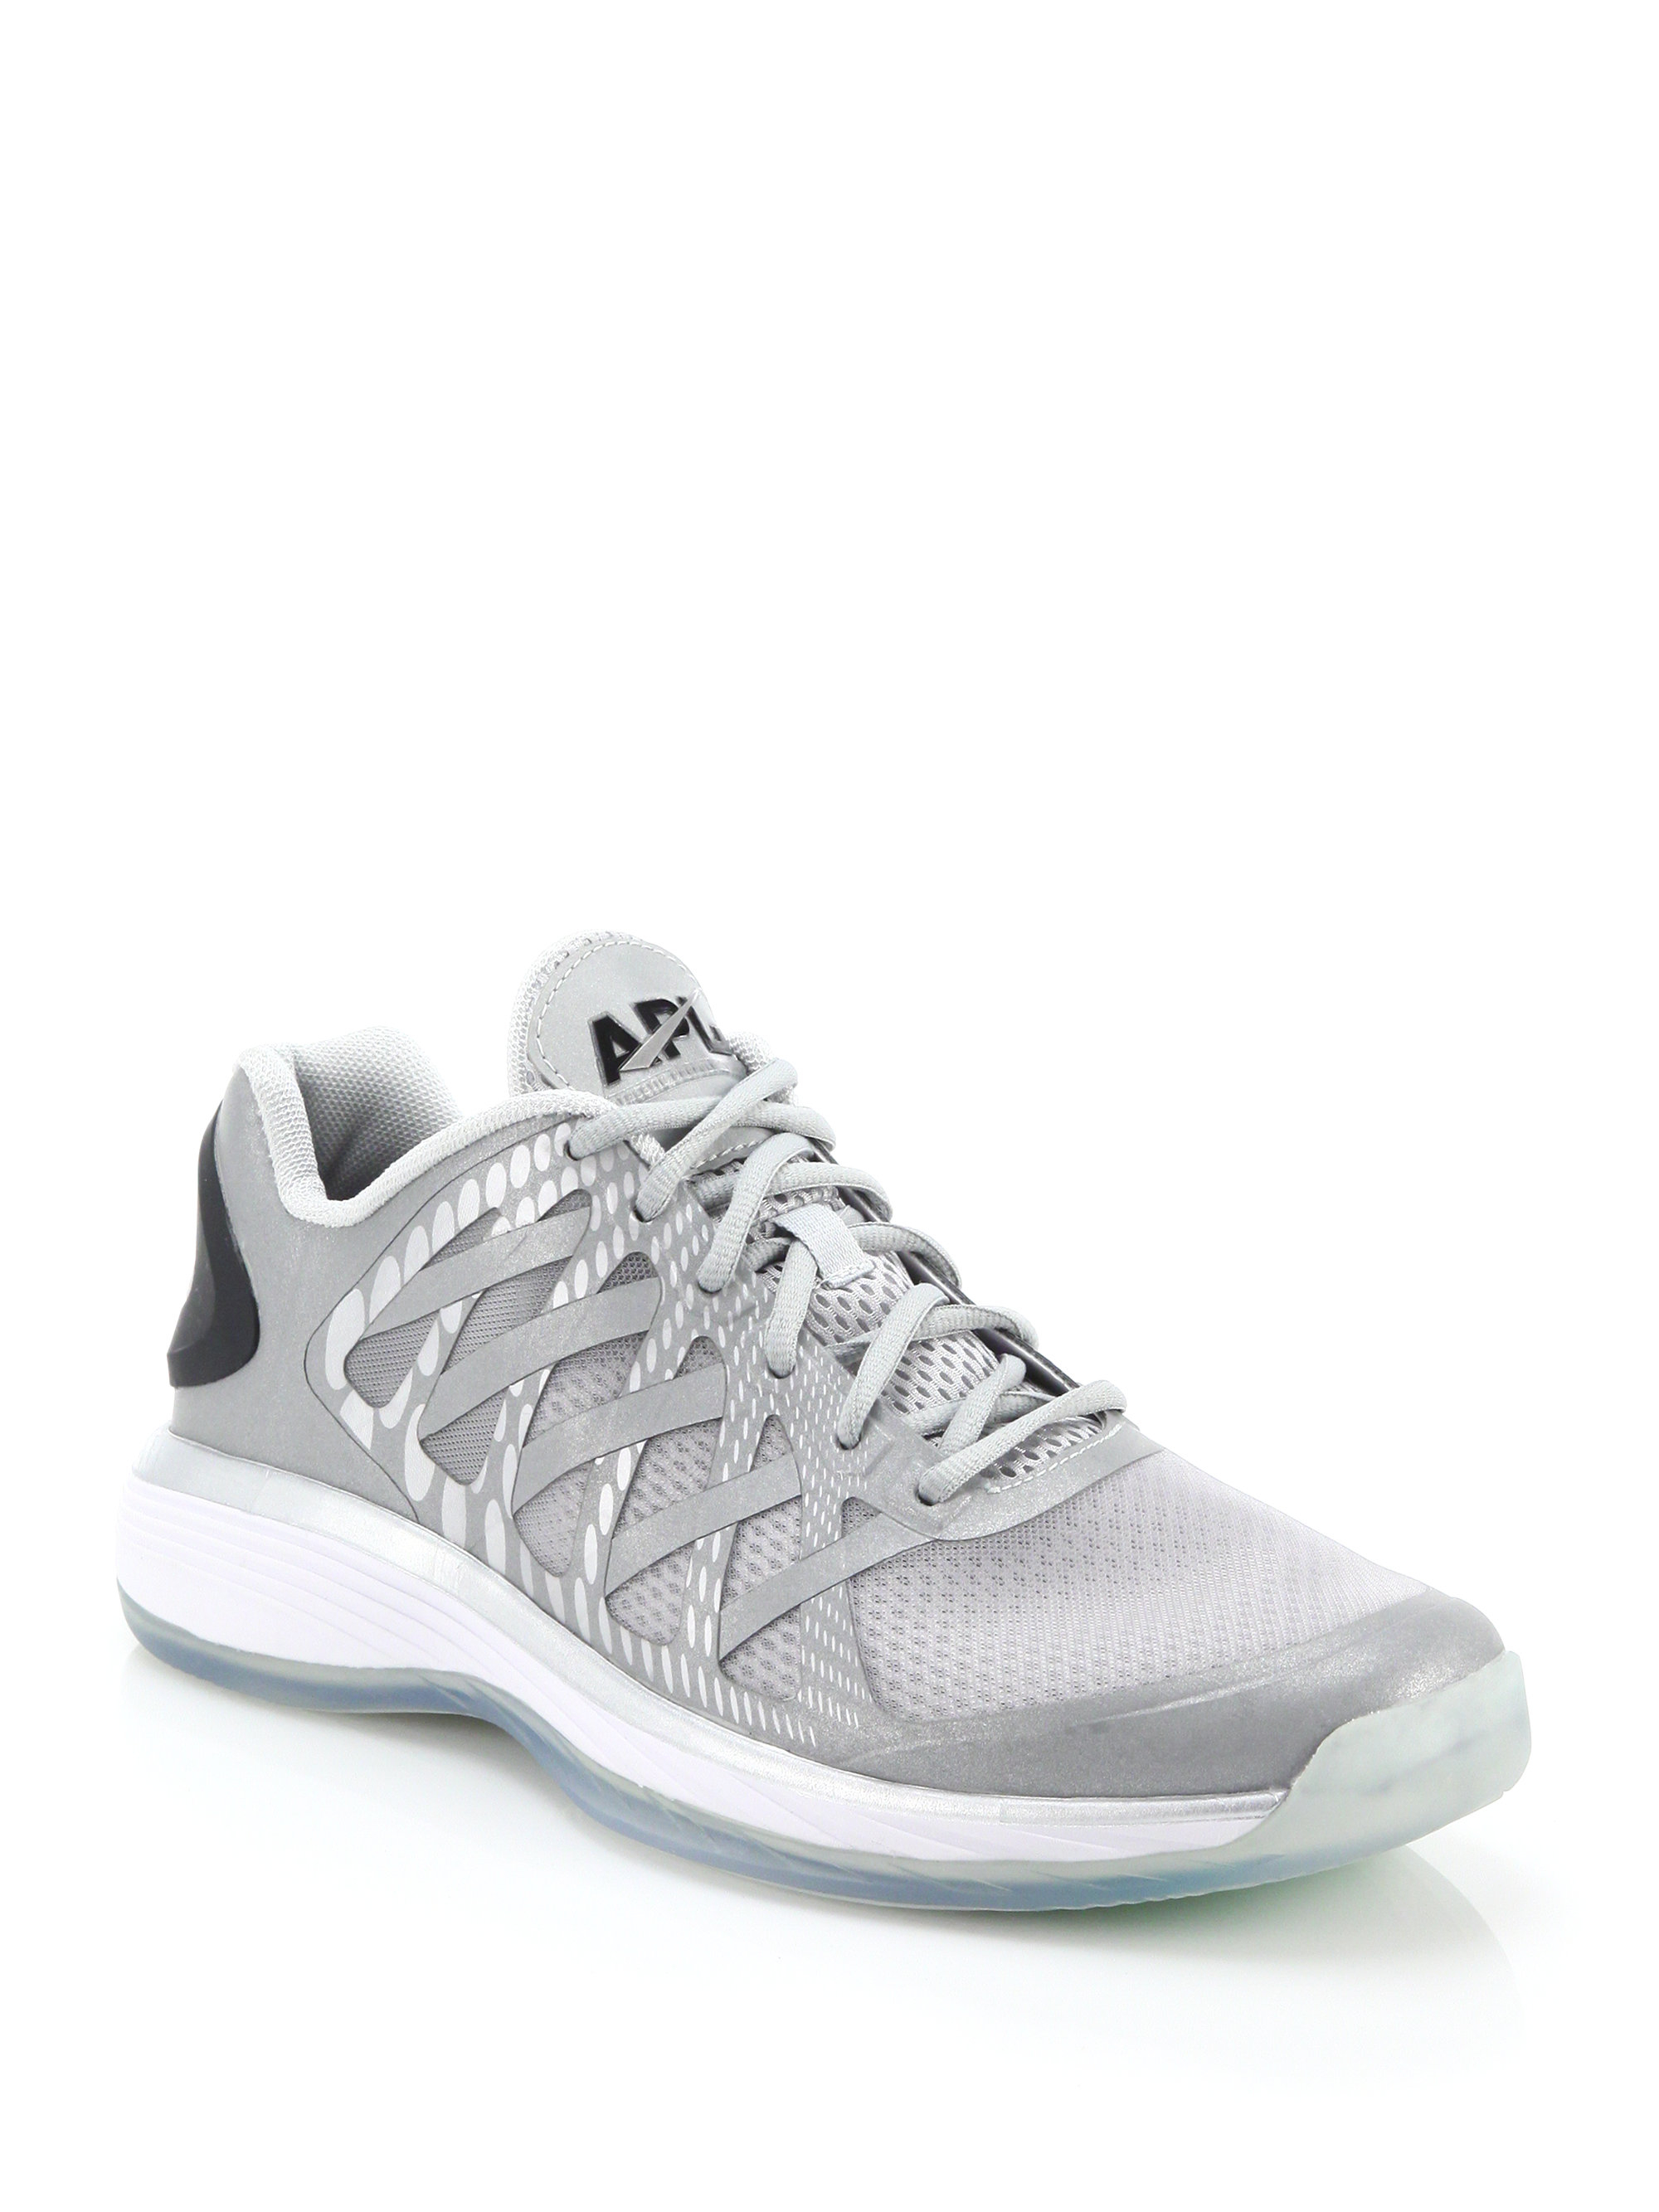 Lyst - Athletic Propulsion Labs Vision Running Sneakers in Metallic for Men